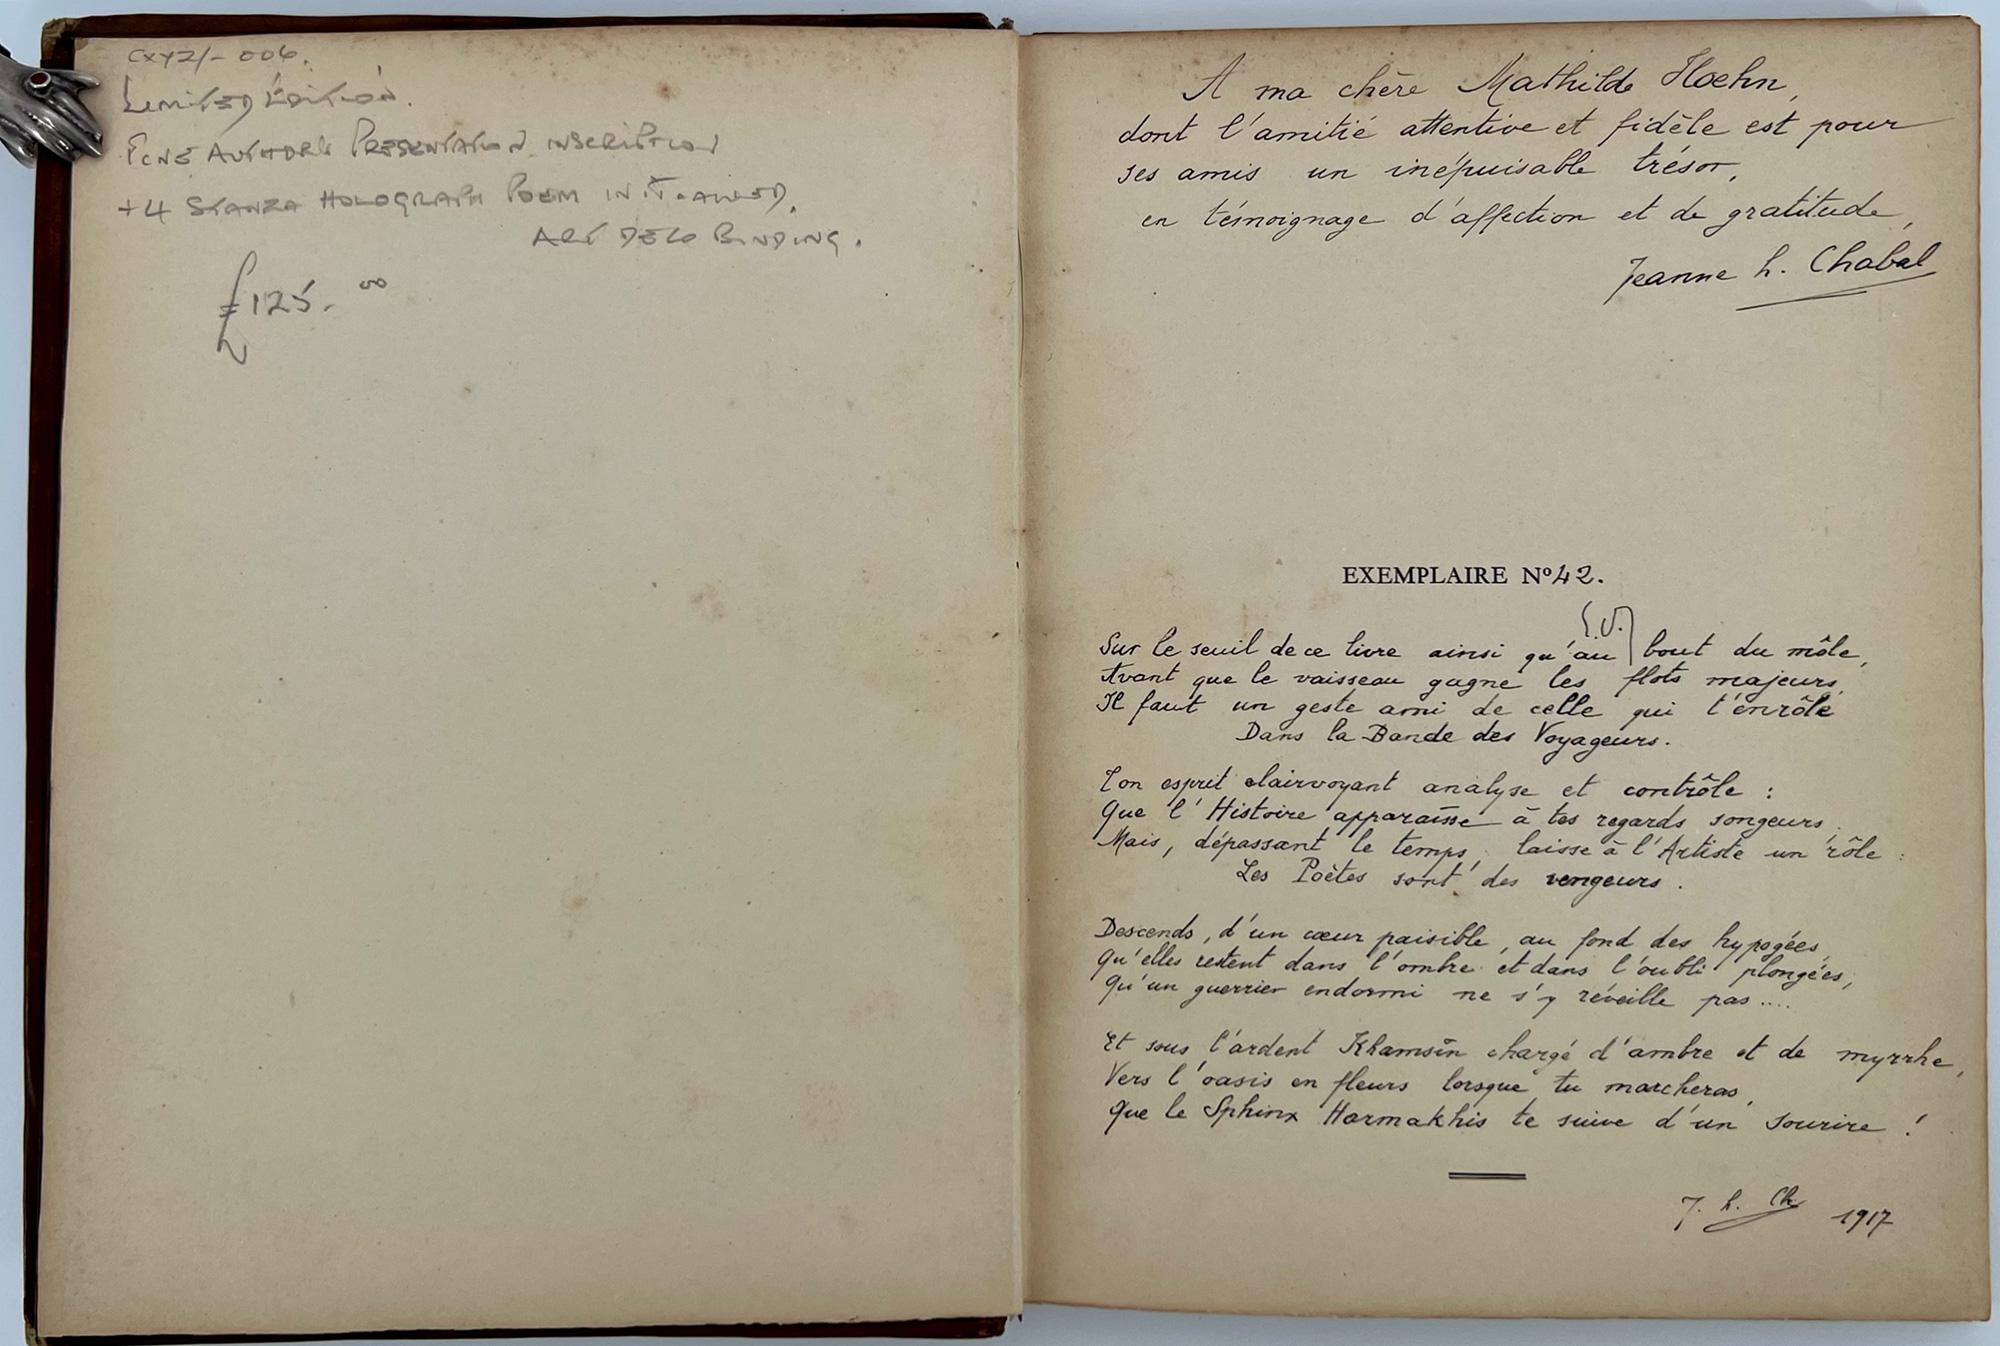 This elegantly-printed and bound small volume is enhanced by an affectionate inscription by the author to her friend Mathilde Koehn, and a holograph poem of 4 stanzas, initialed and dated 1917. The Khamisin, or Kamseen, is dry, hot, sandy local wind